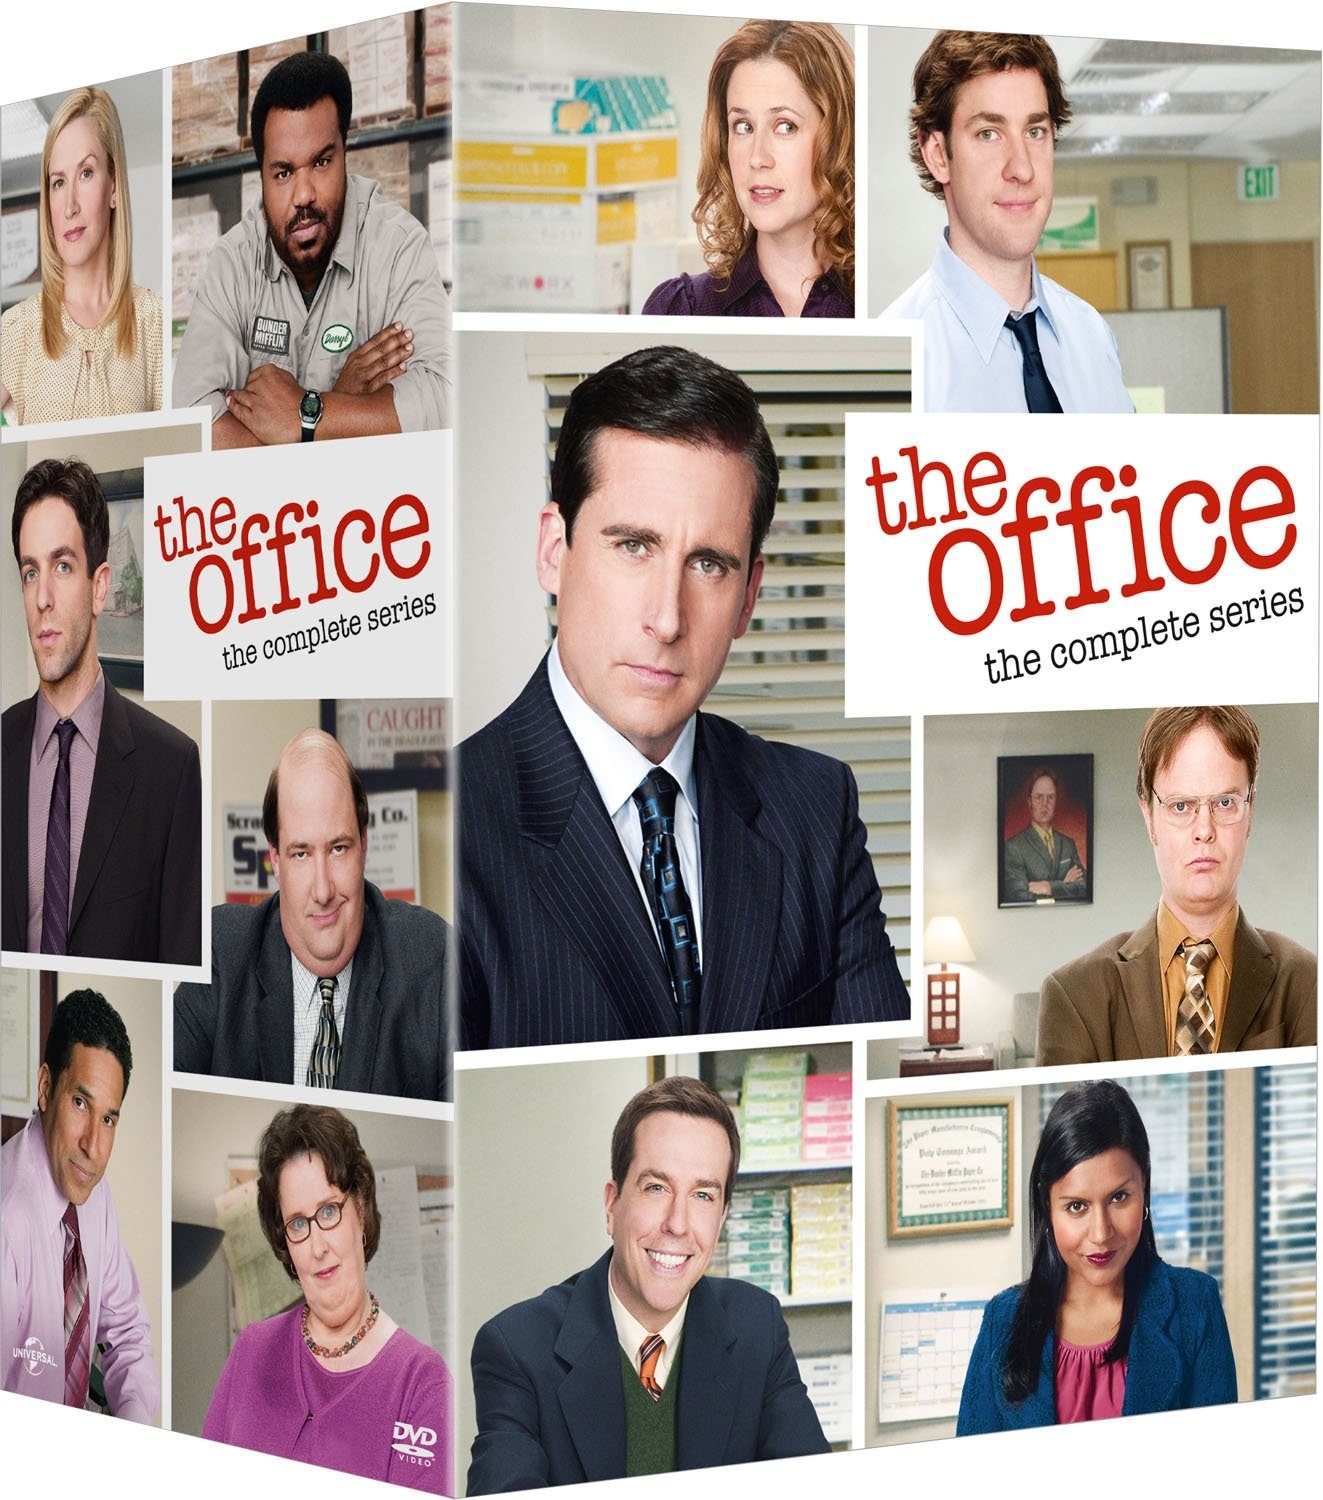 DVD of the office